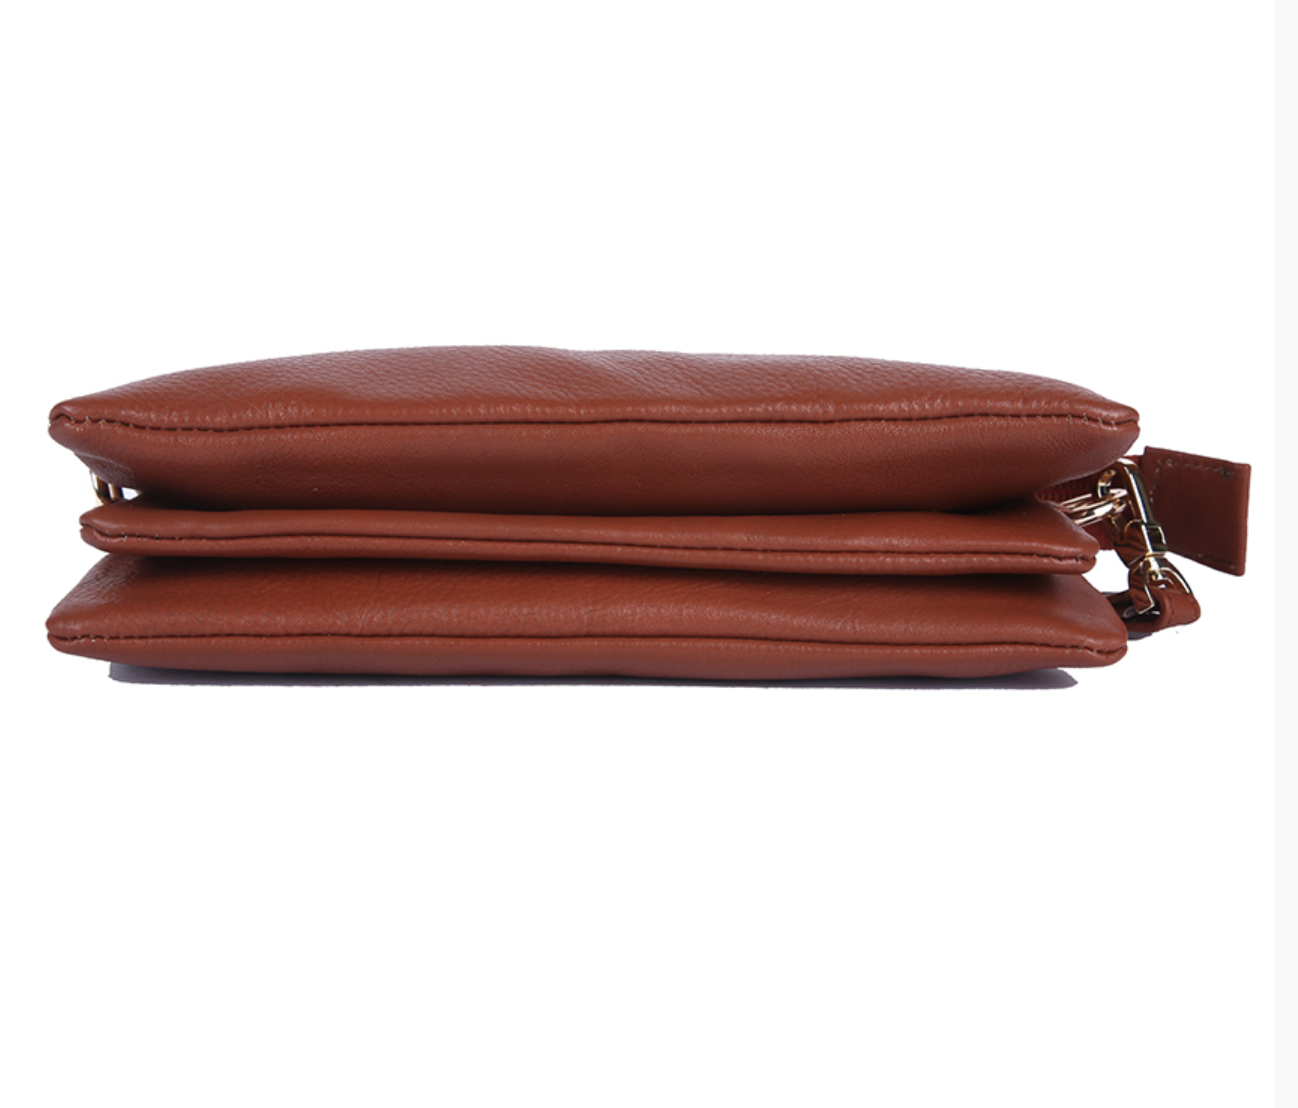 Eve Leather Clutch | Clutche | Wristlet | The Leather Crew